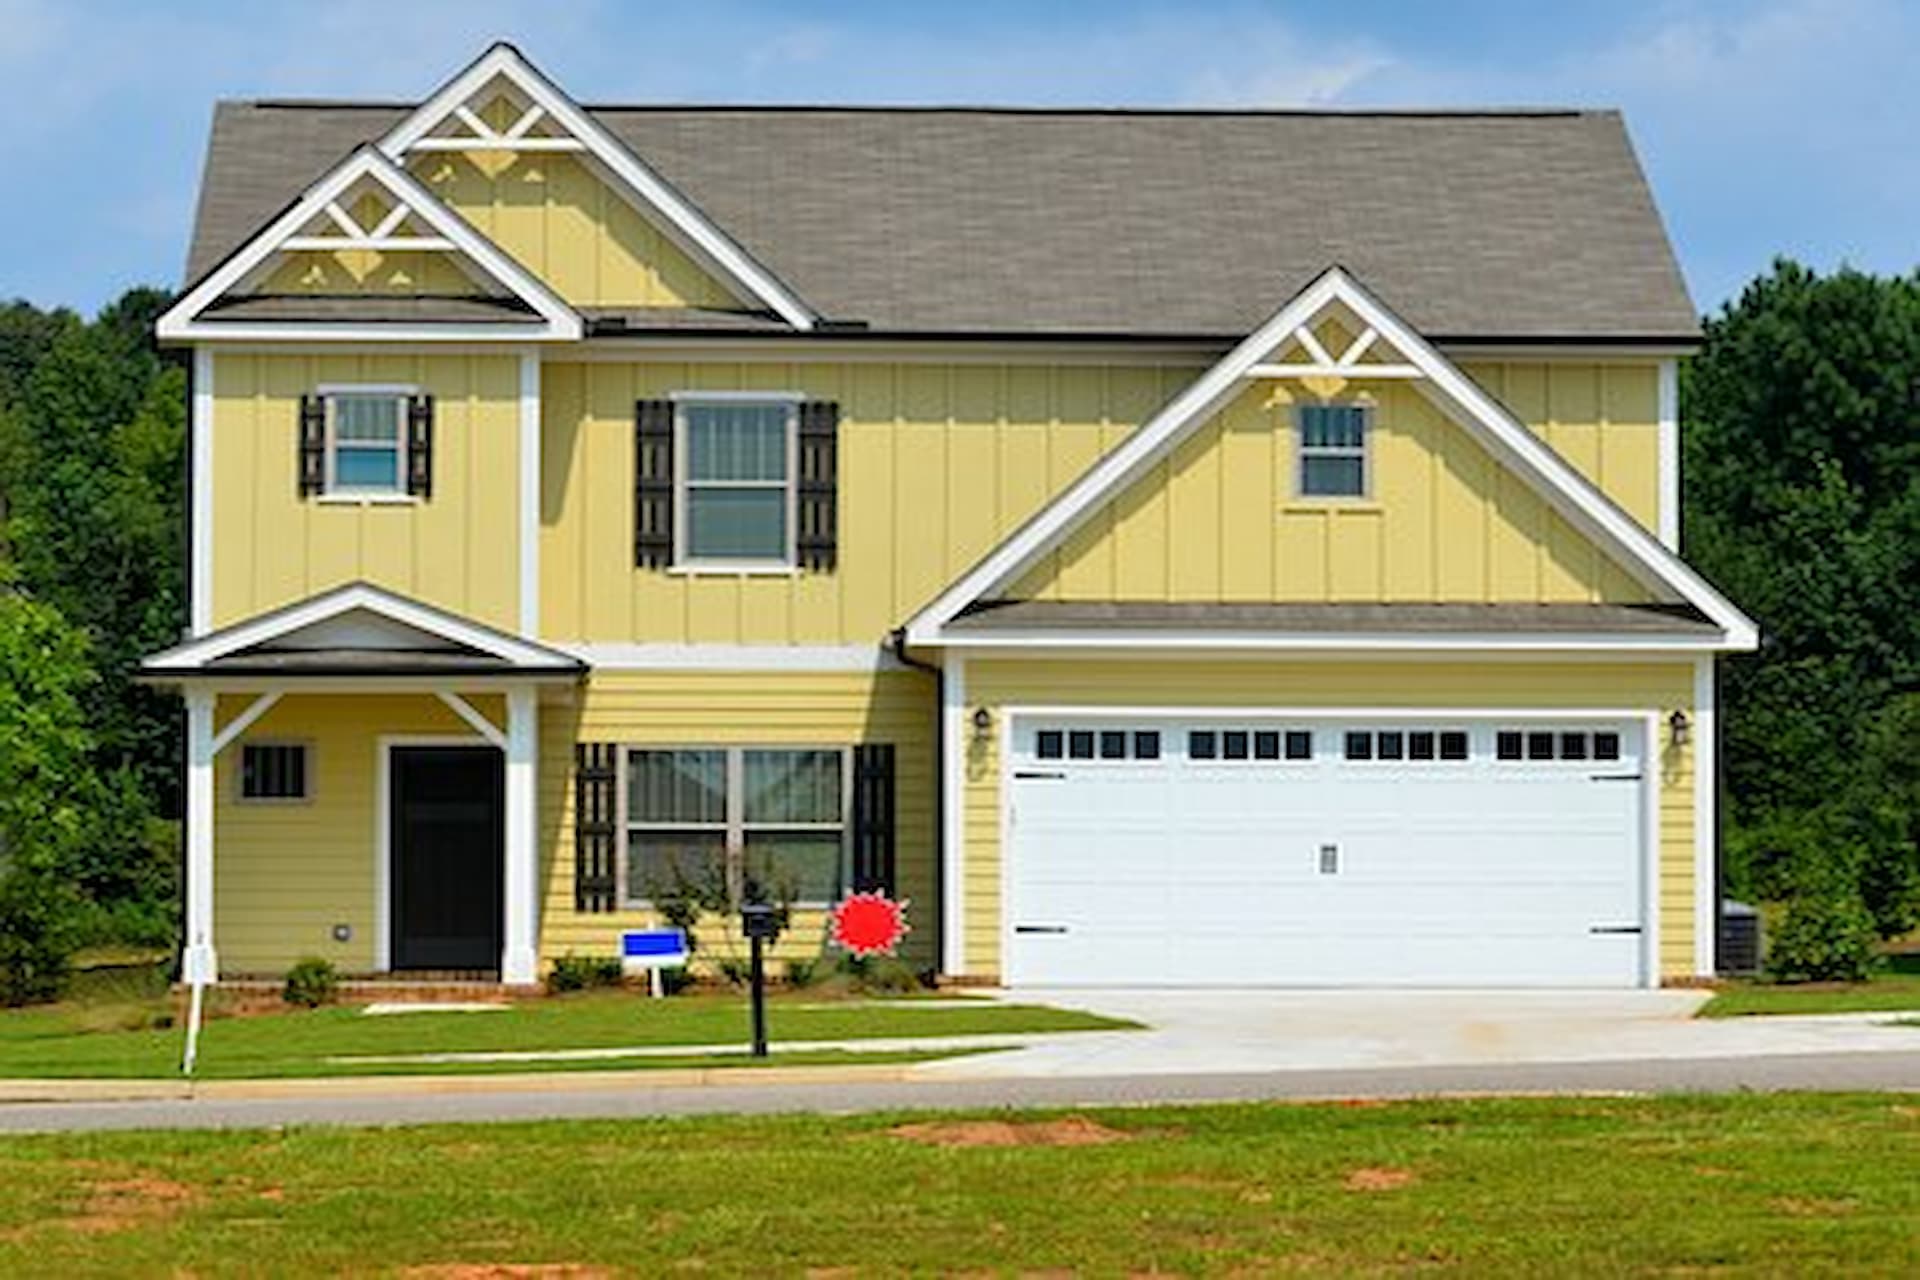 What Are Some Great Perks Of Owning A Driveway In Your Home